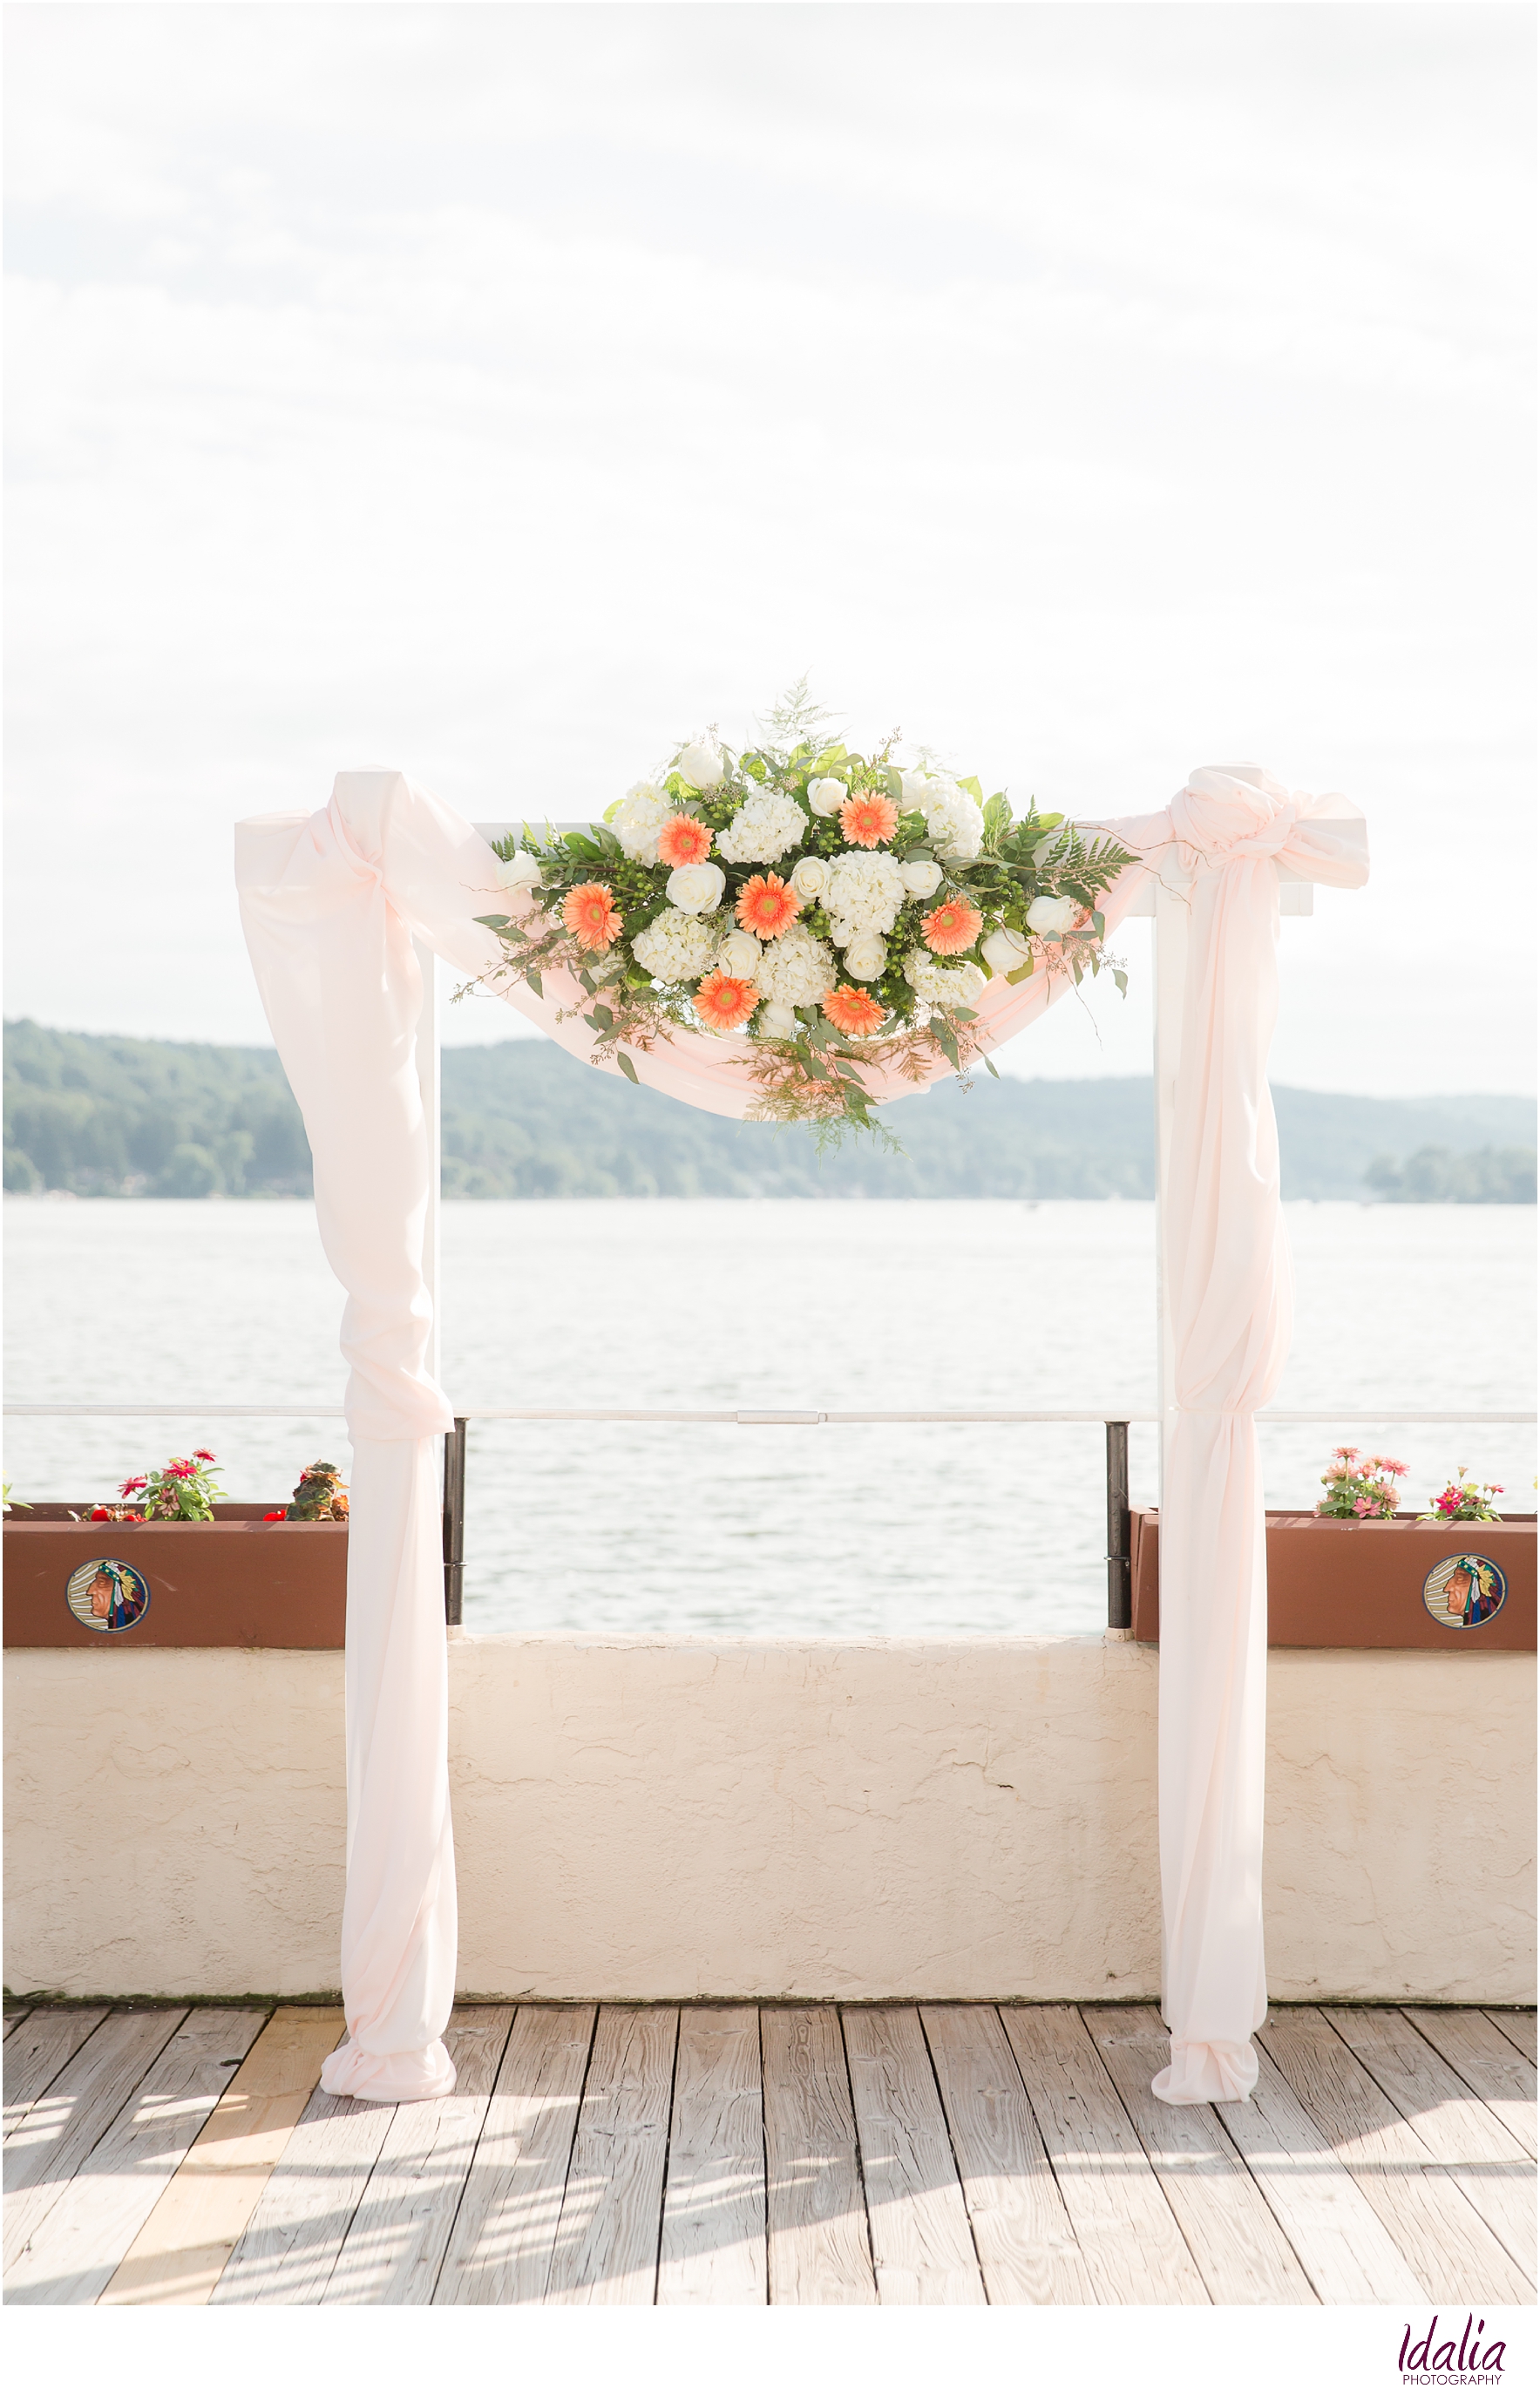 Looking for a beautiful lakeside venue for your NJ wedding? Click to learn more about Lake Mohawk Country Club in Sparta, NJ. | #lakemohawk #njweddingvenue